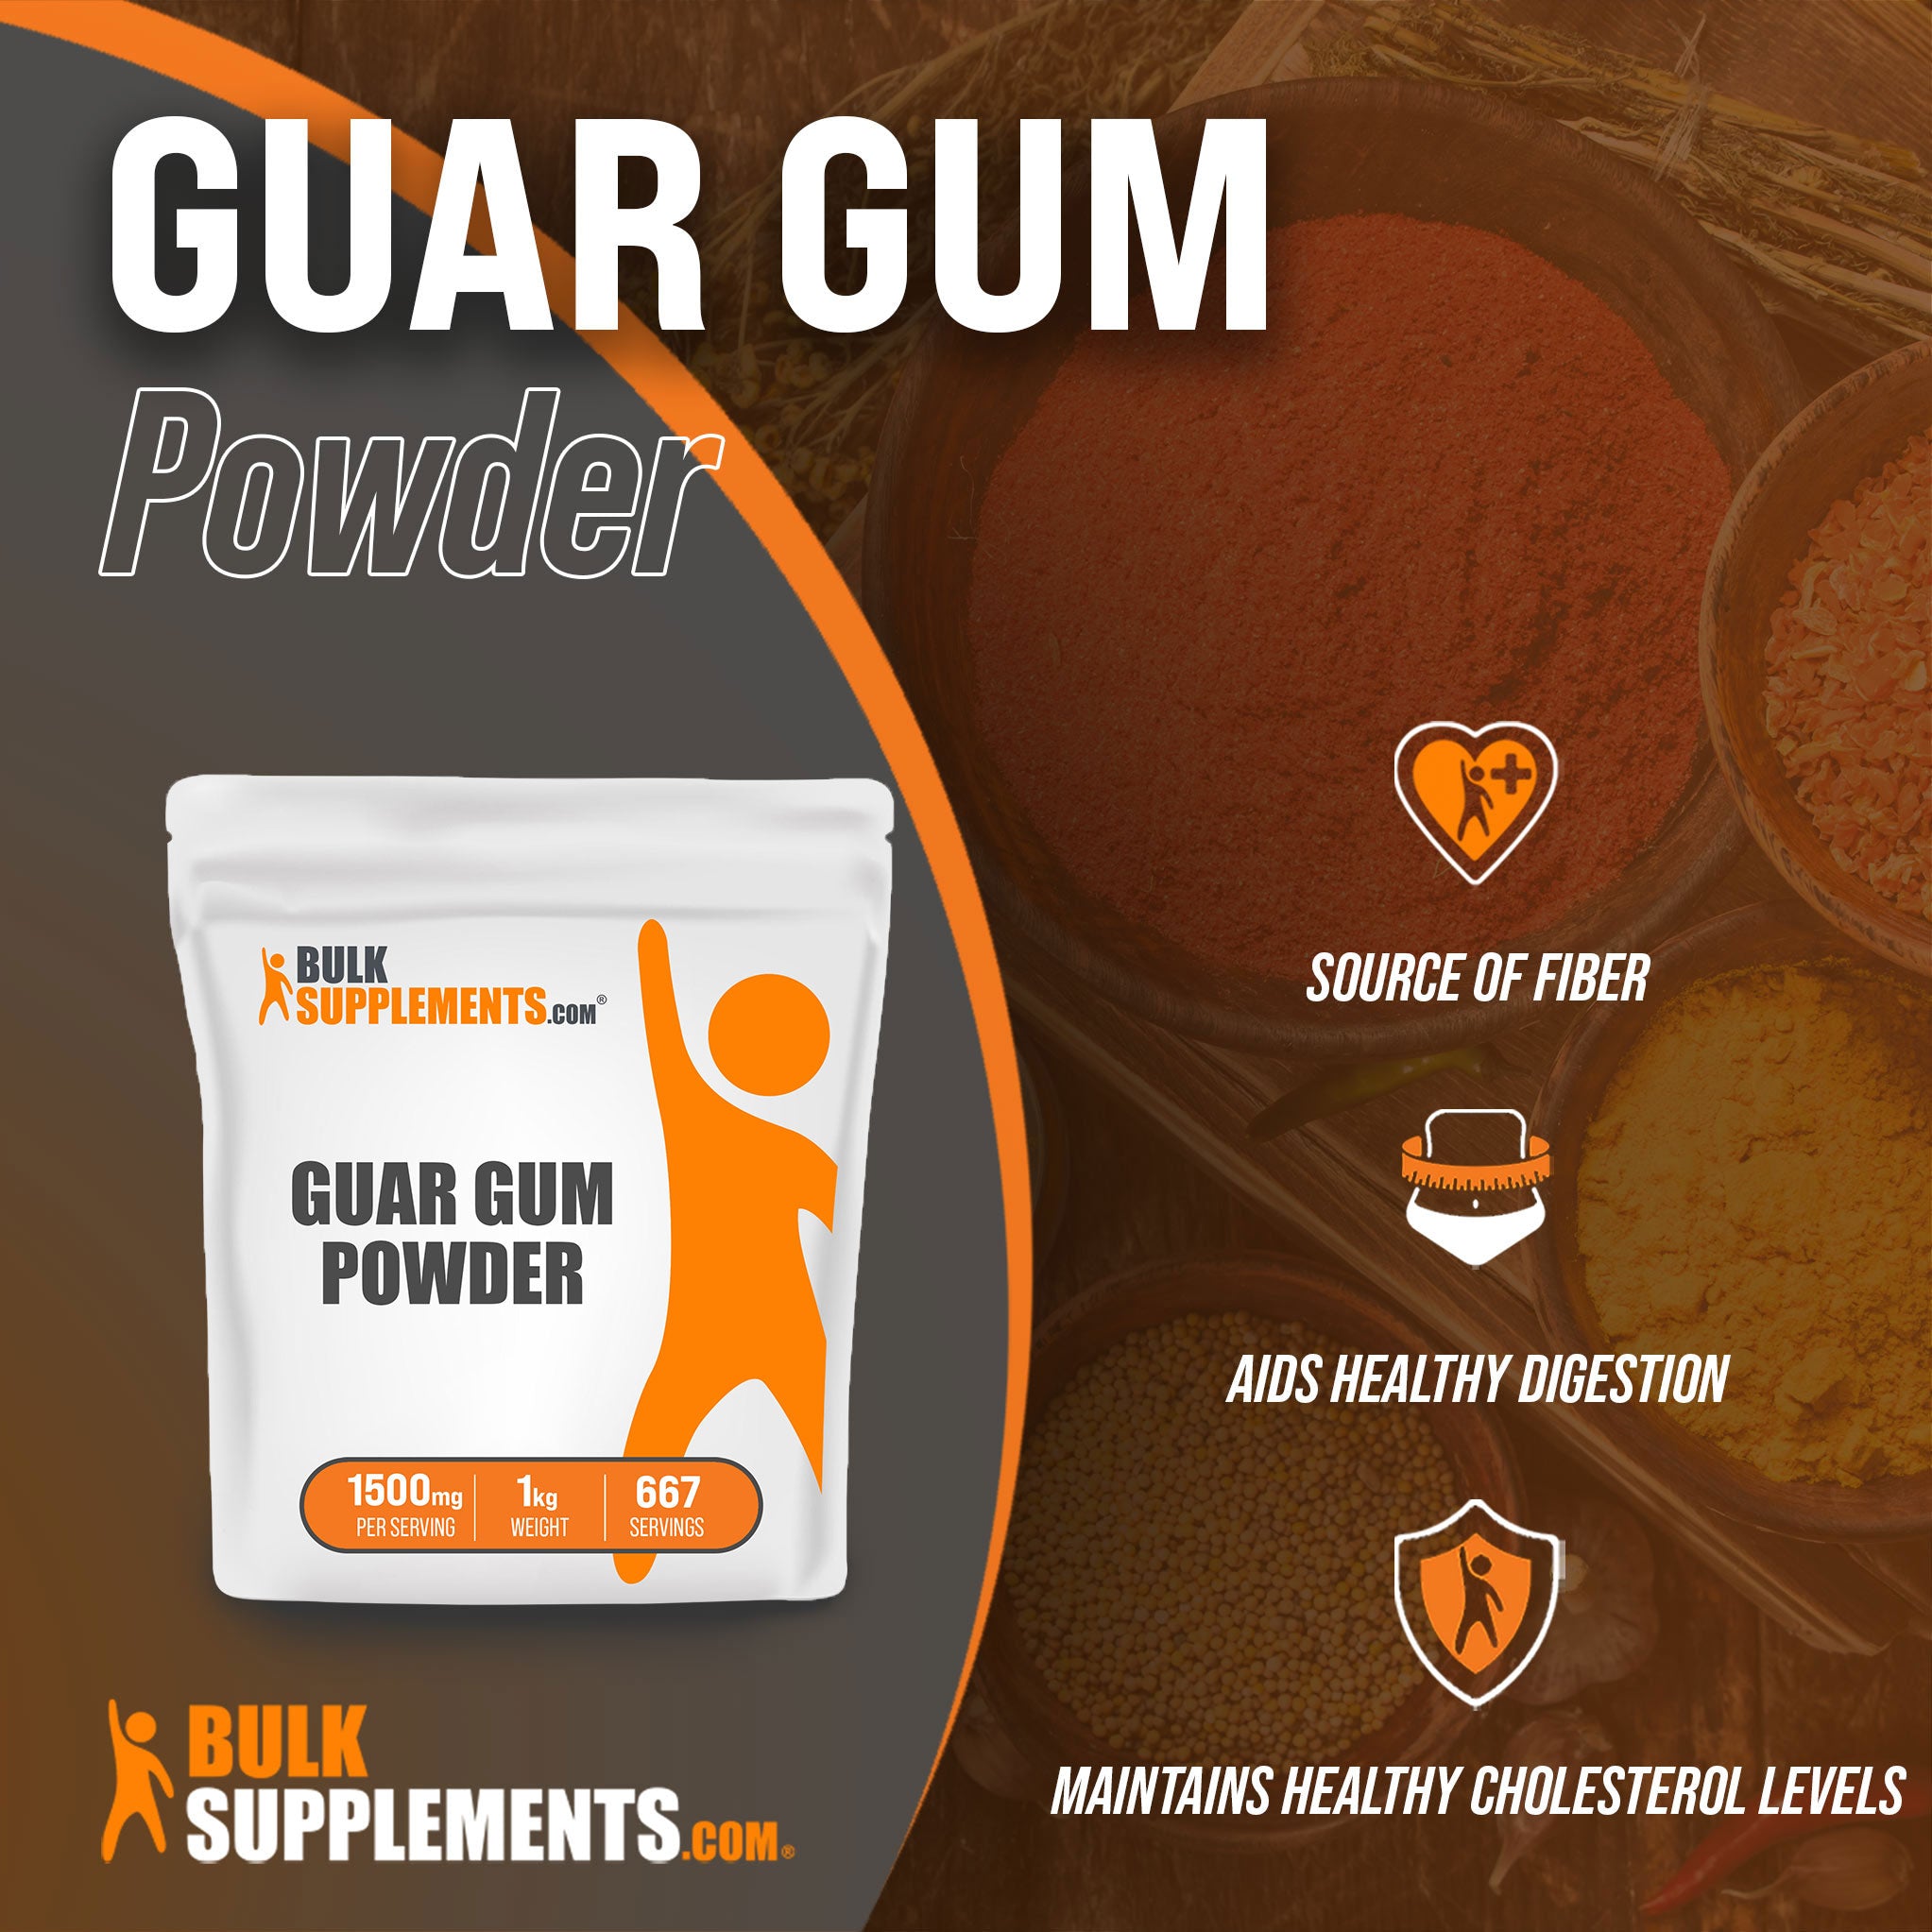 Benefits of Guar Gum Powder; source of fiber, aids healthy digestion, maintains healthy cholesterol levels